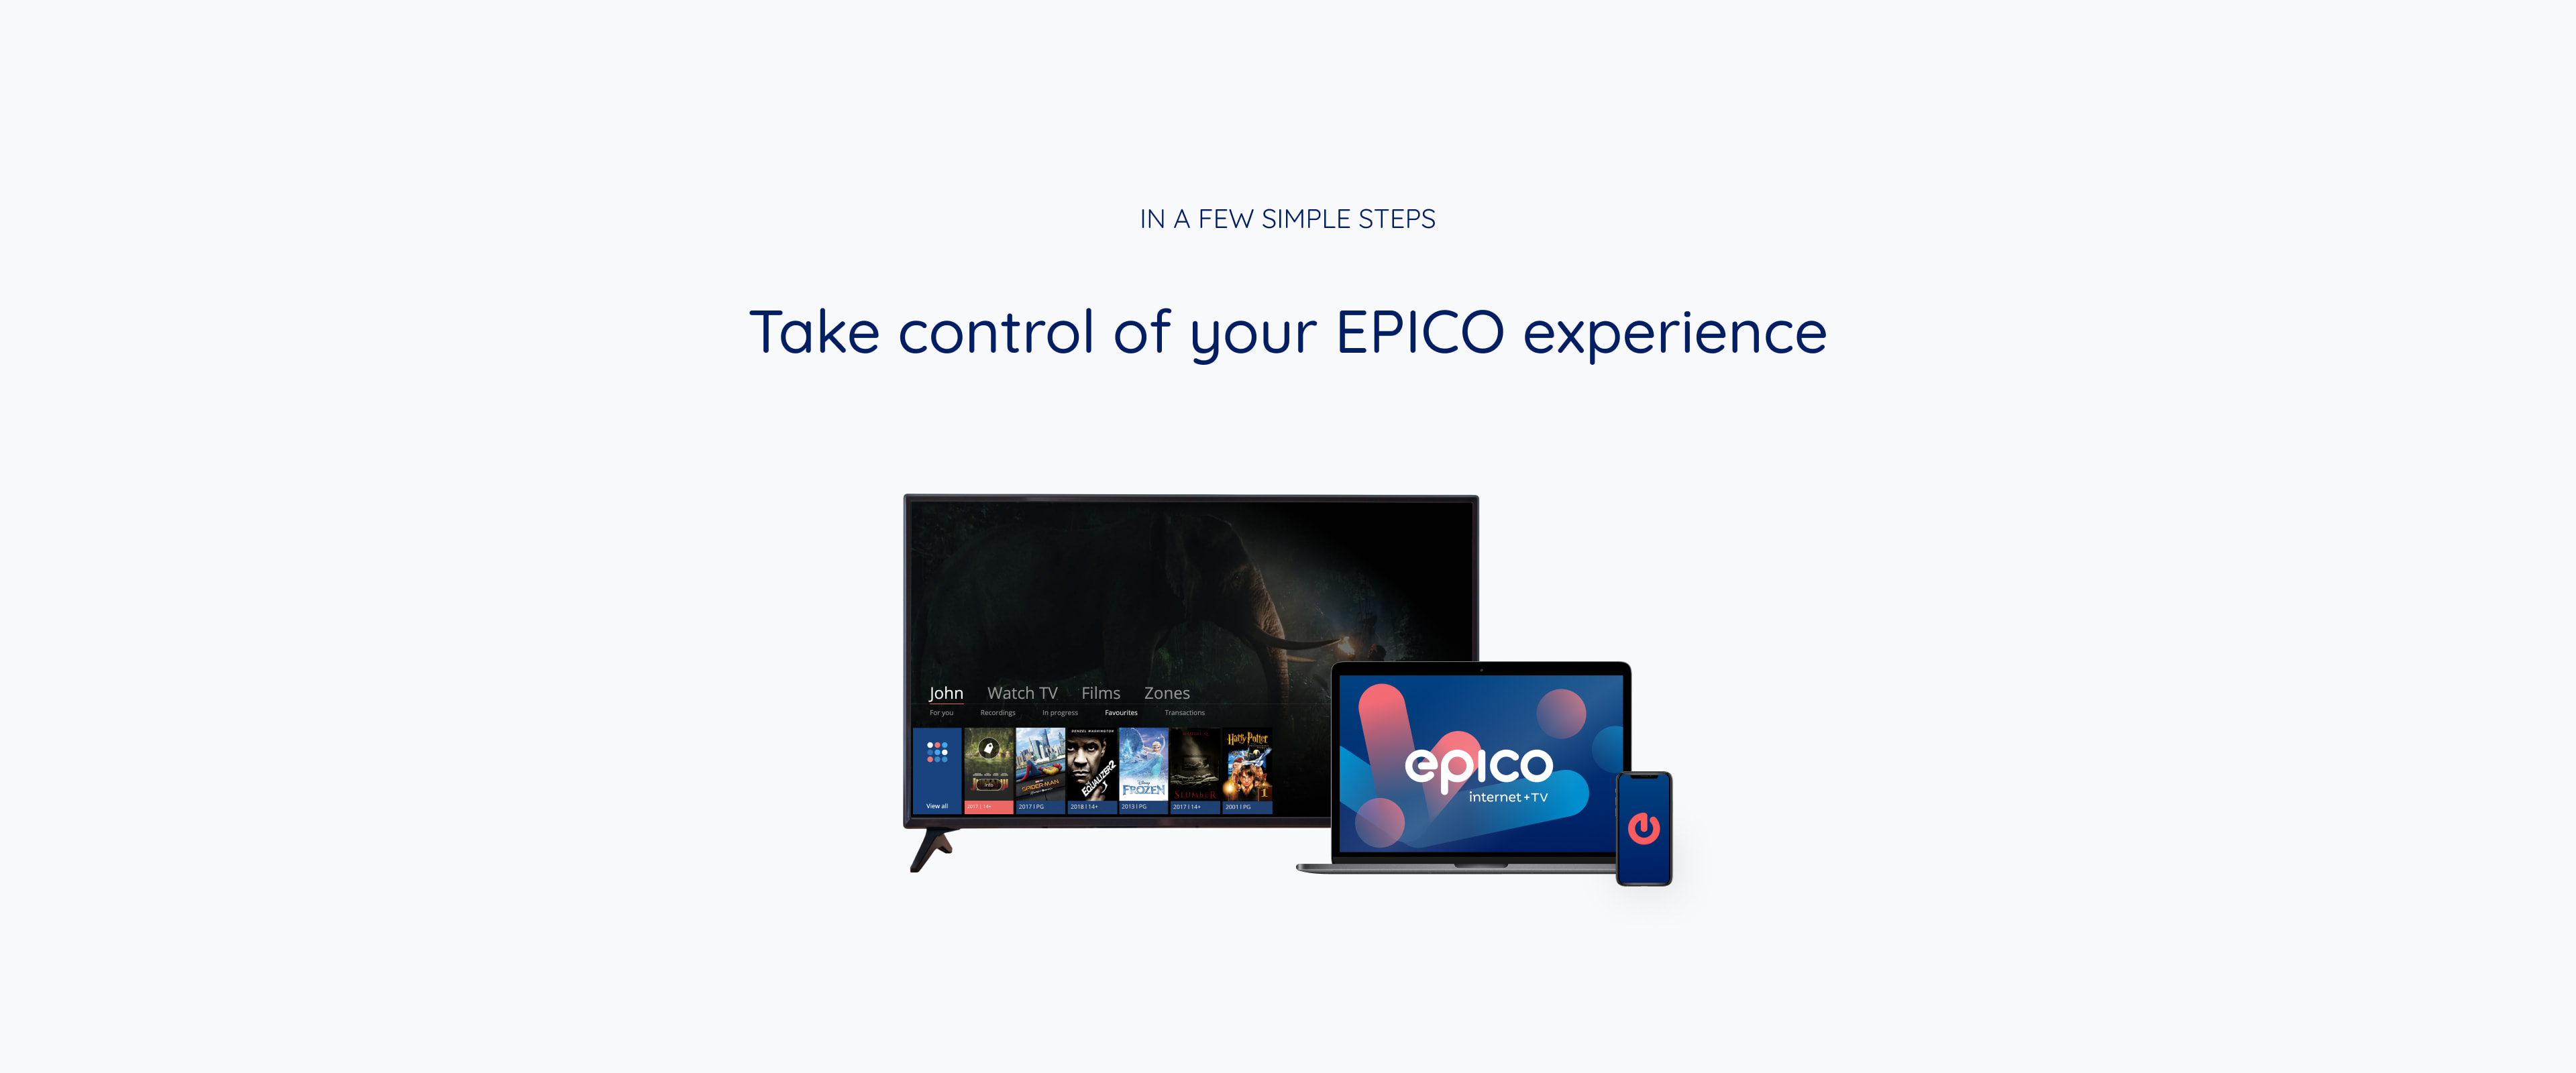 In a few simple steps. Take control of your EPICO experience.